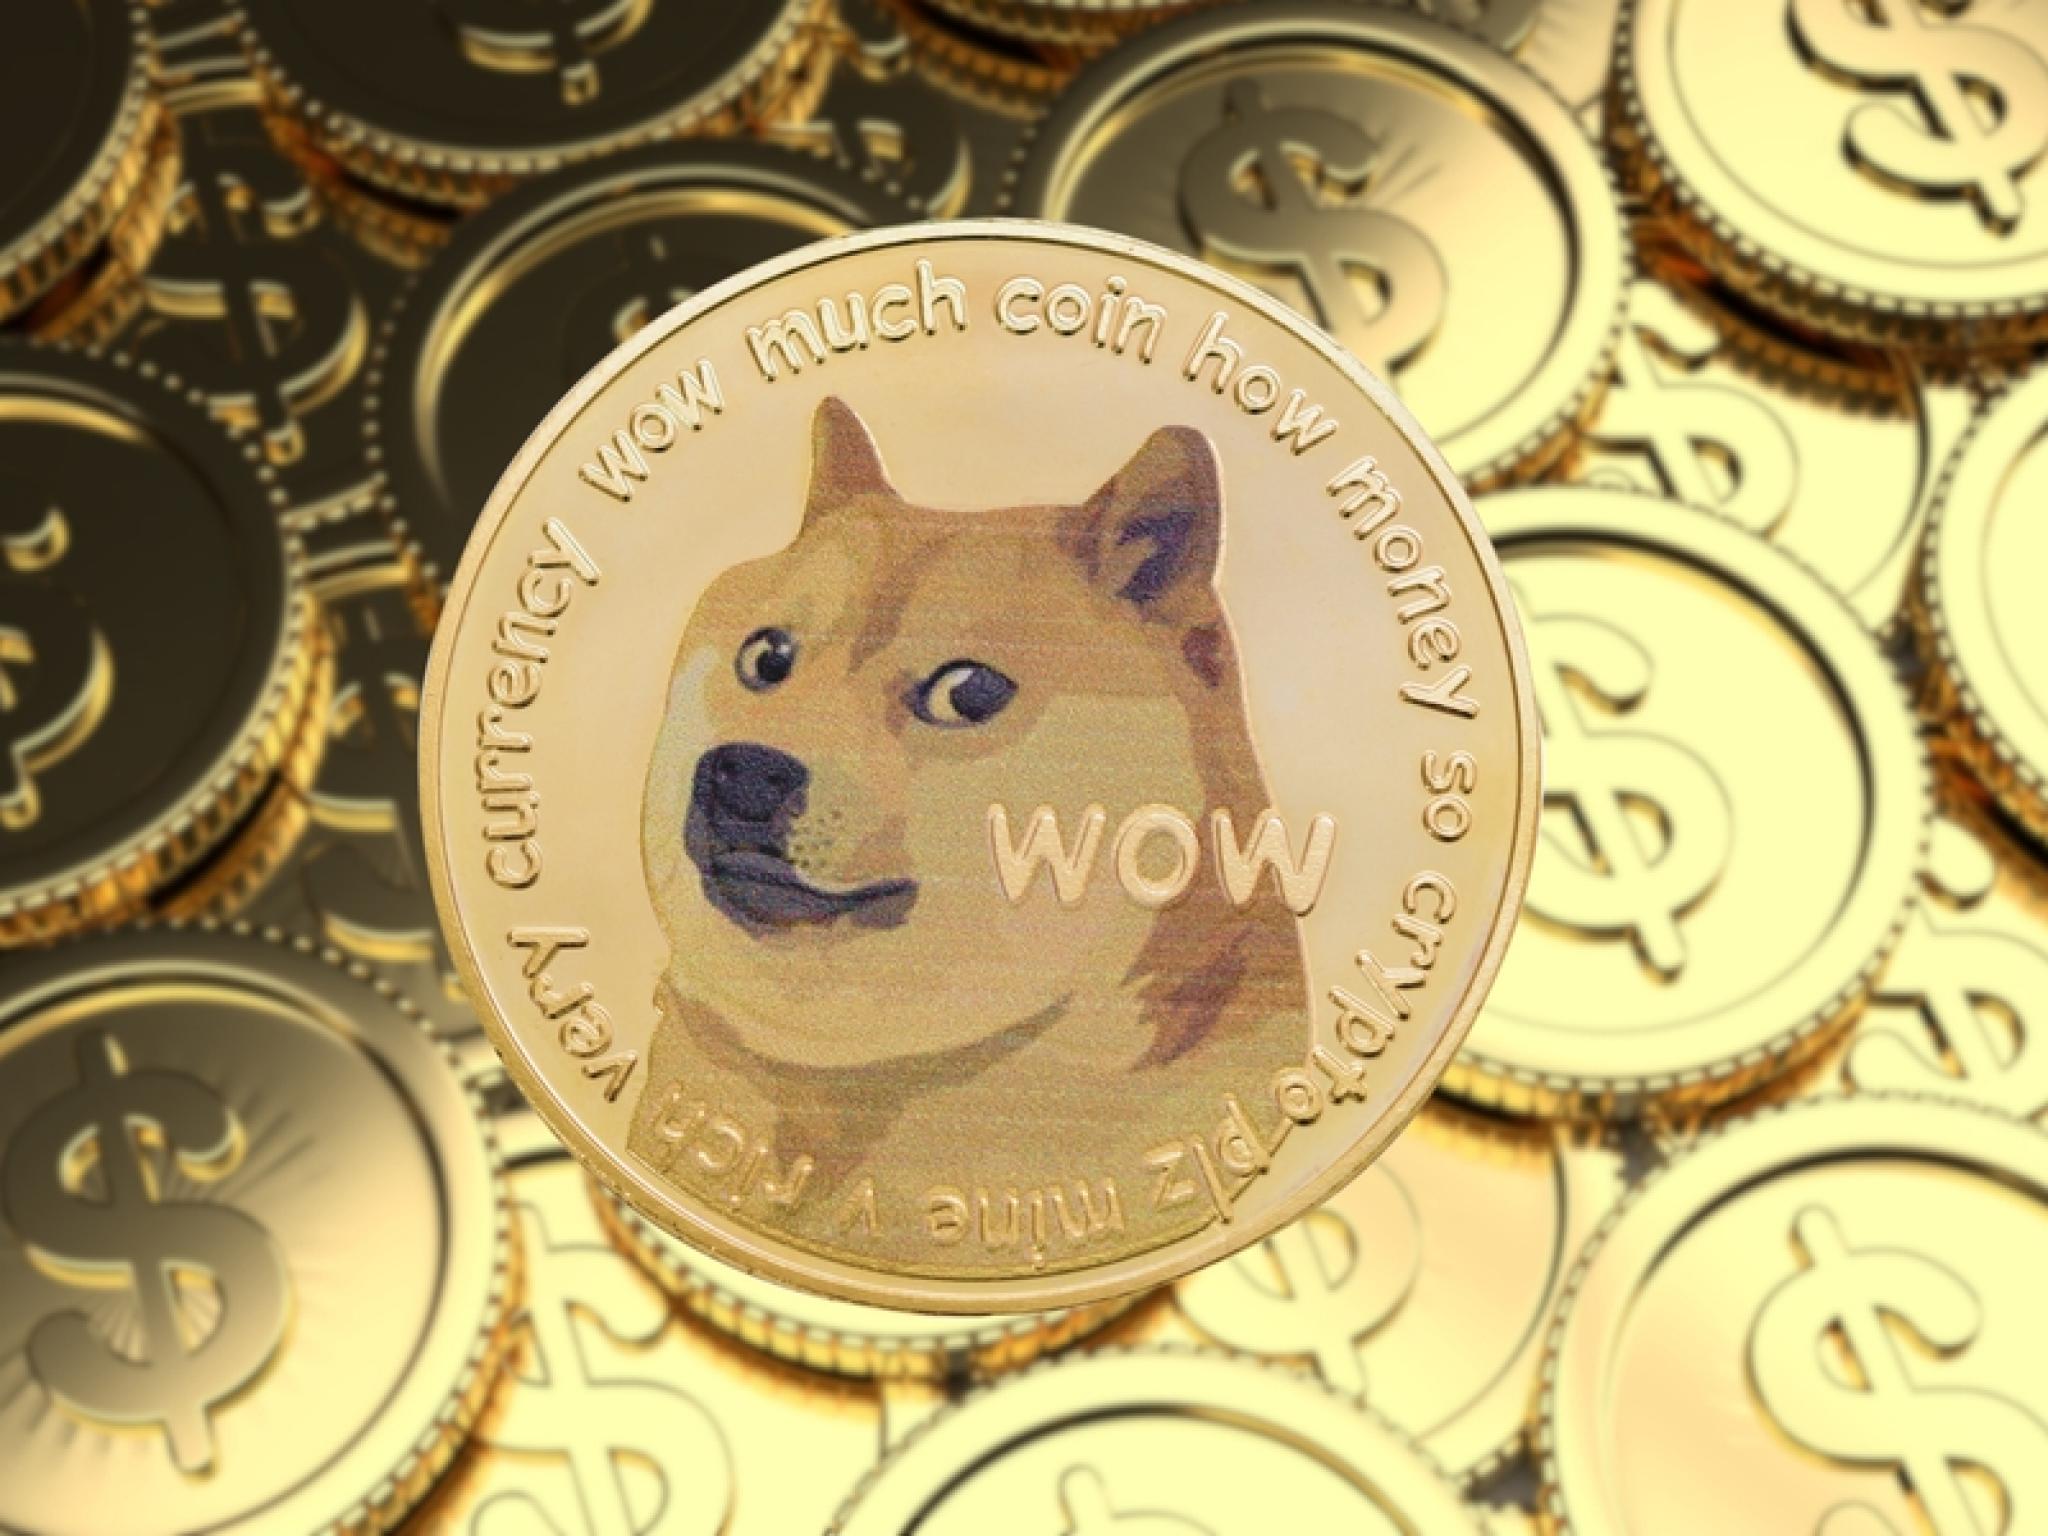  doge-to-40-cents-is-one-of-the-safest-trades-takes-1-elon-tweet-to-blow-it-up-touts-trader 